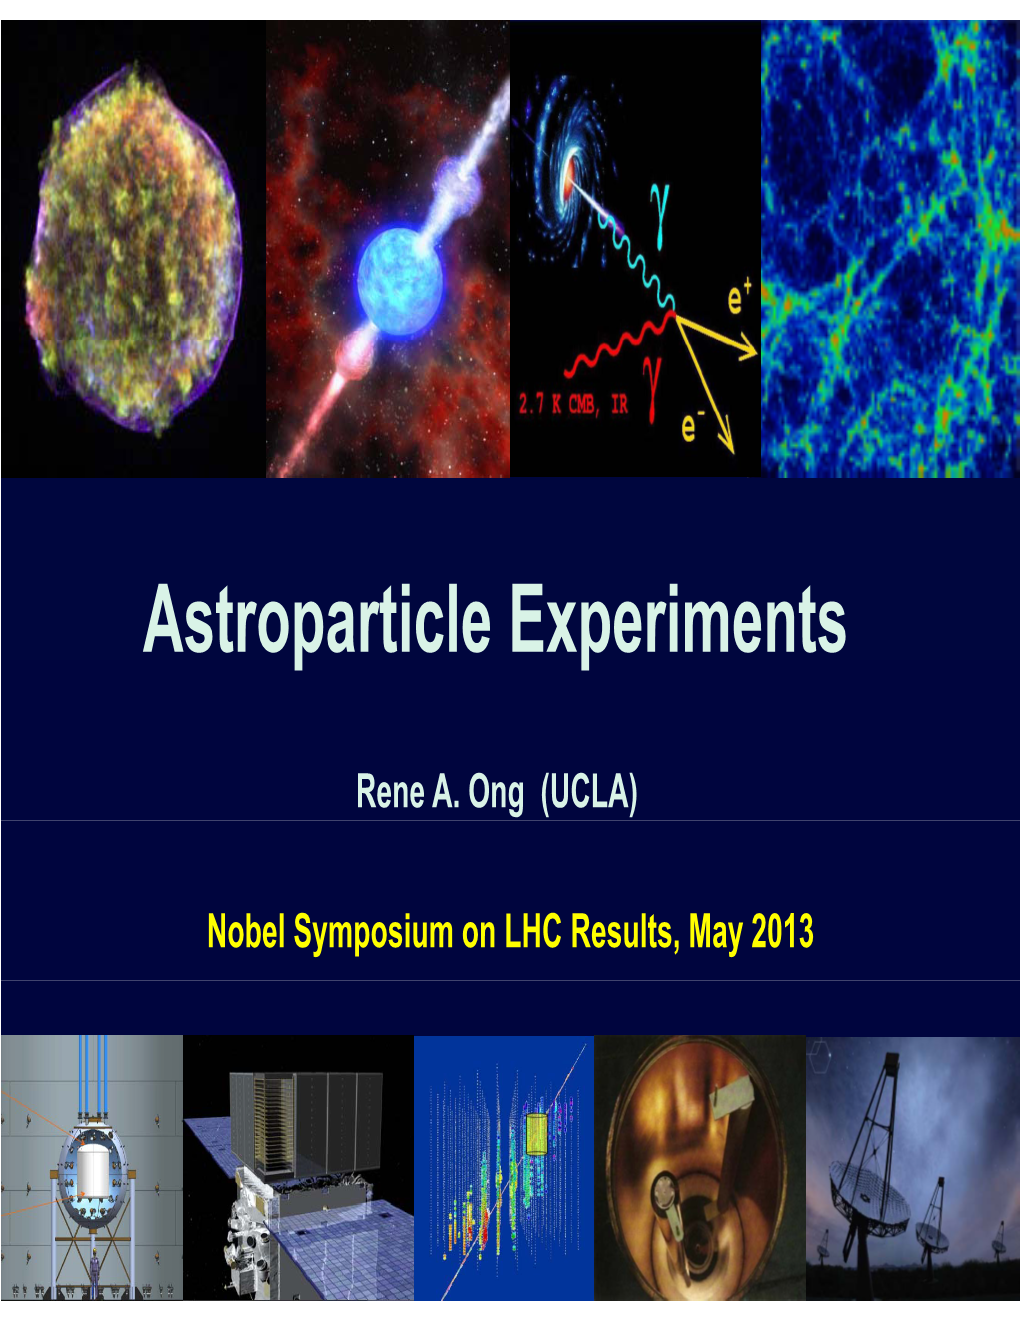 Astroparticle Experiments